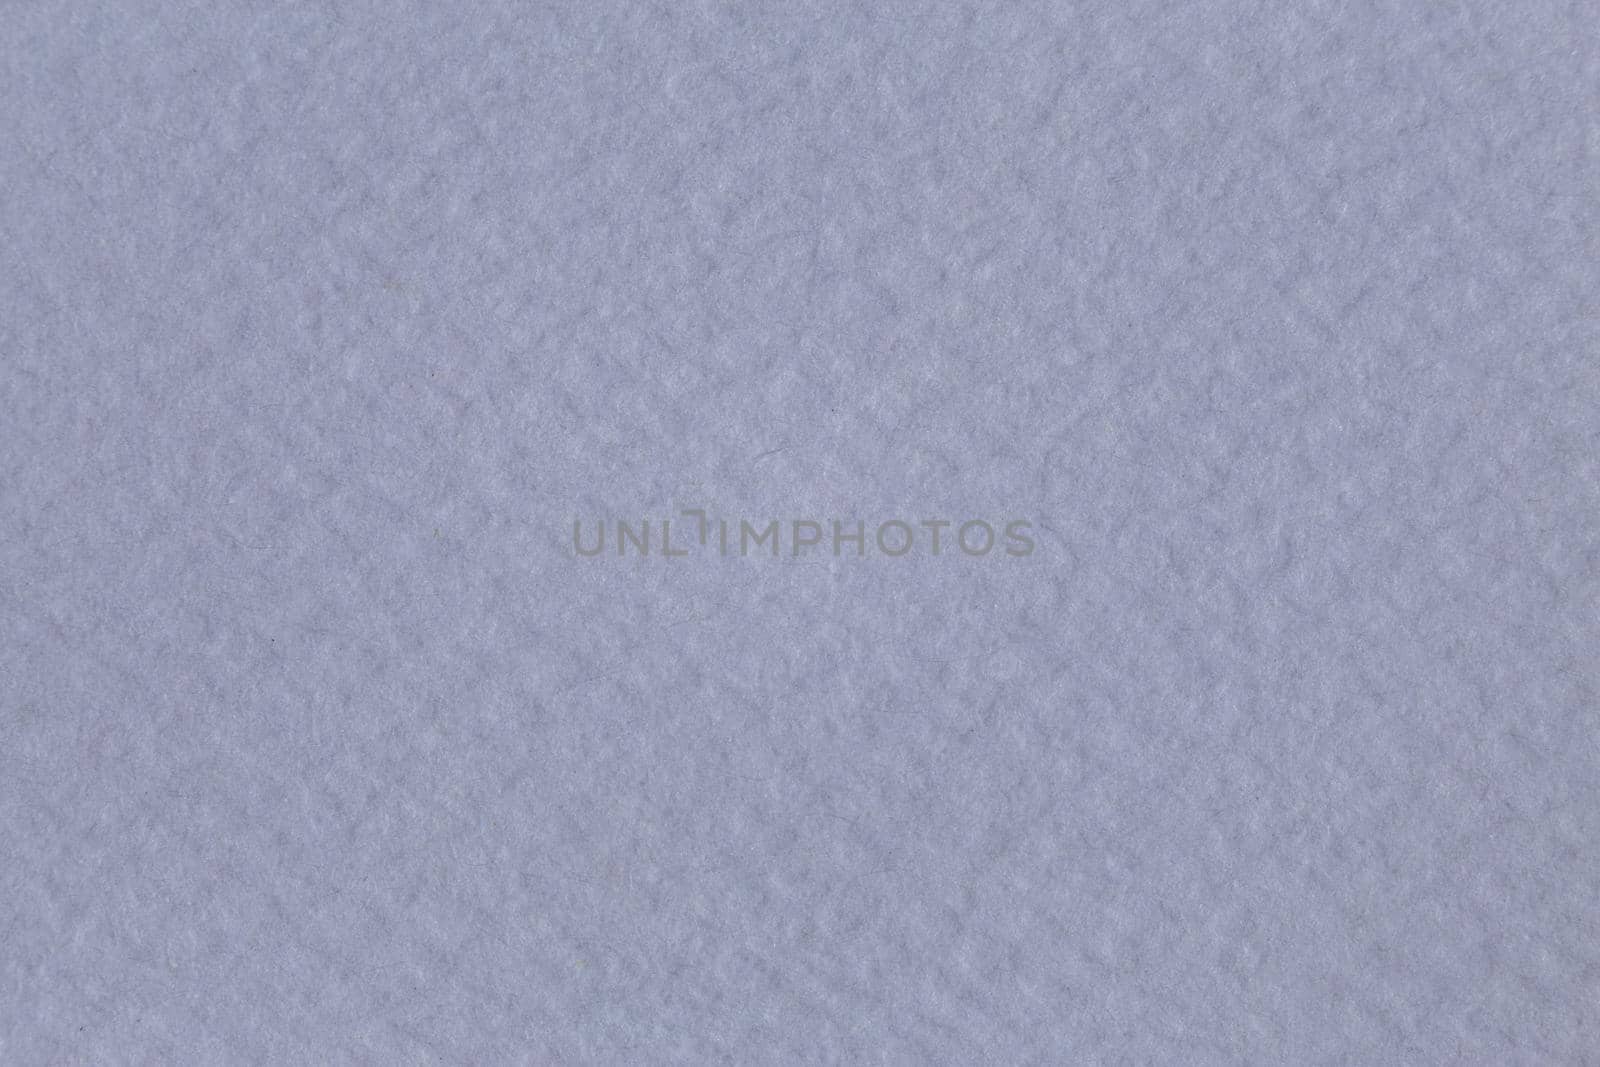 White blank watercolor paper texture, extreme close-up macro shot